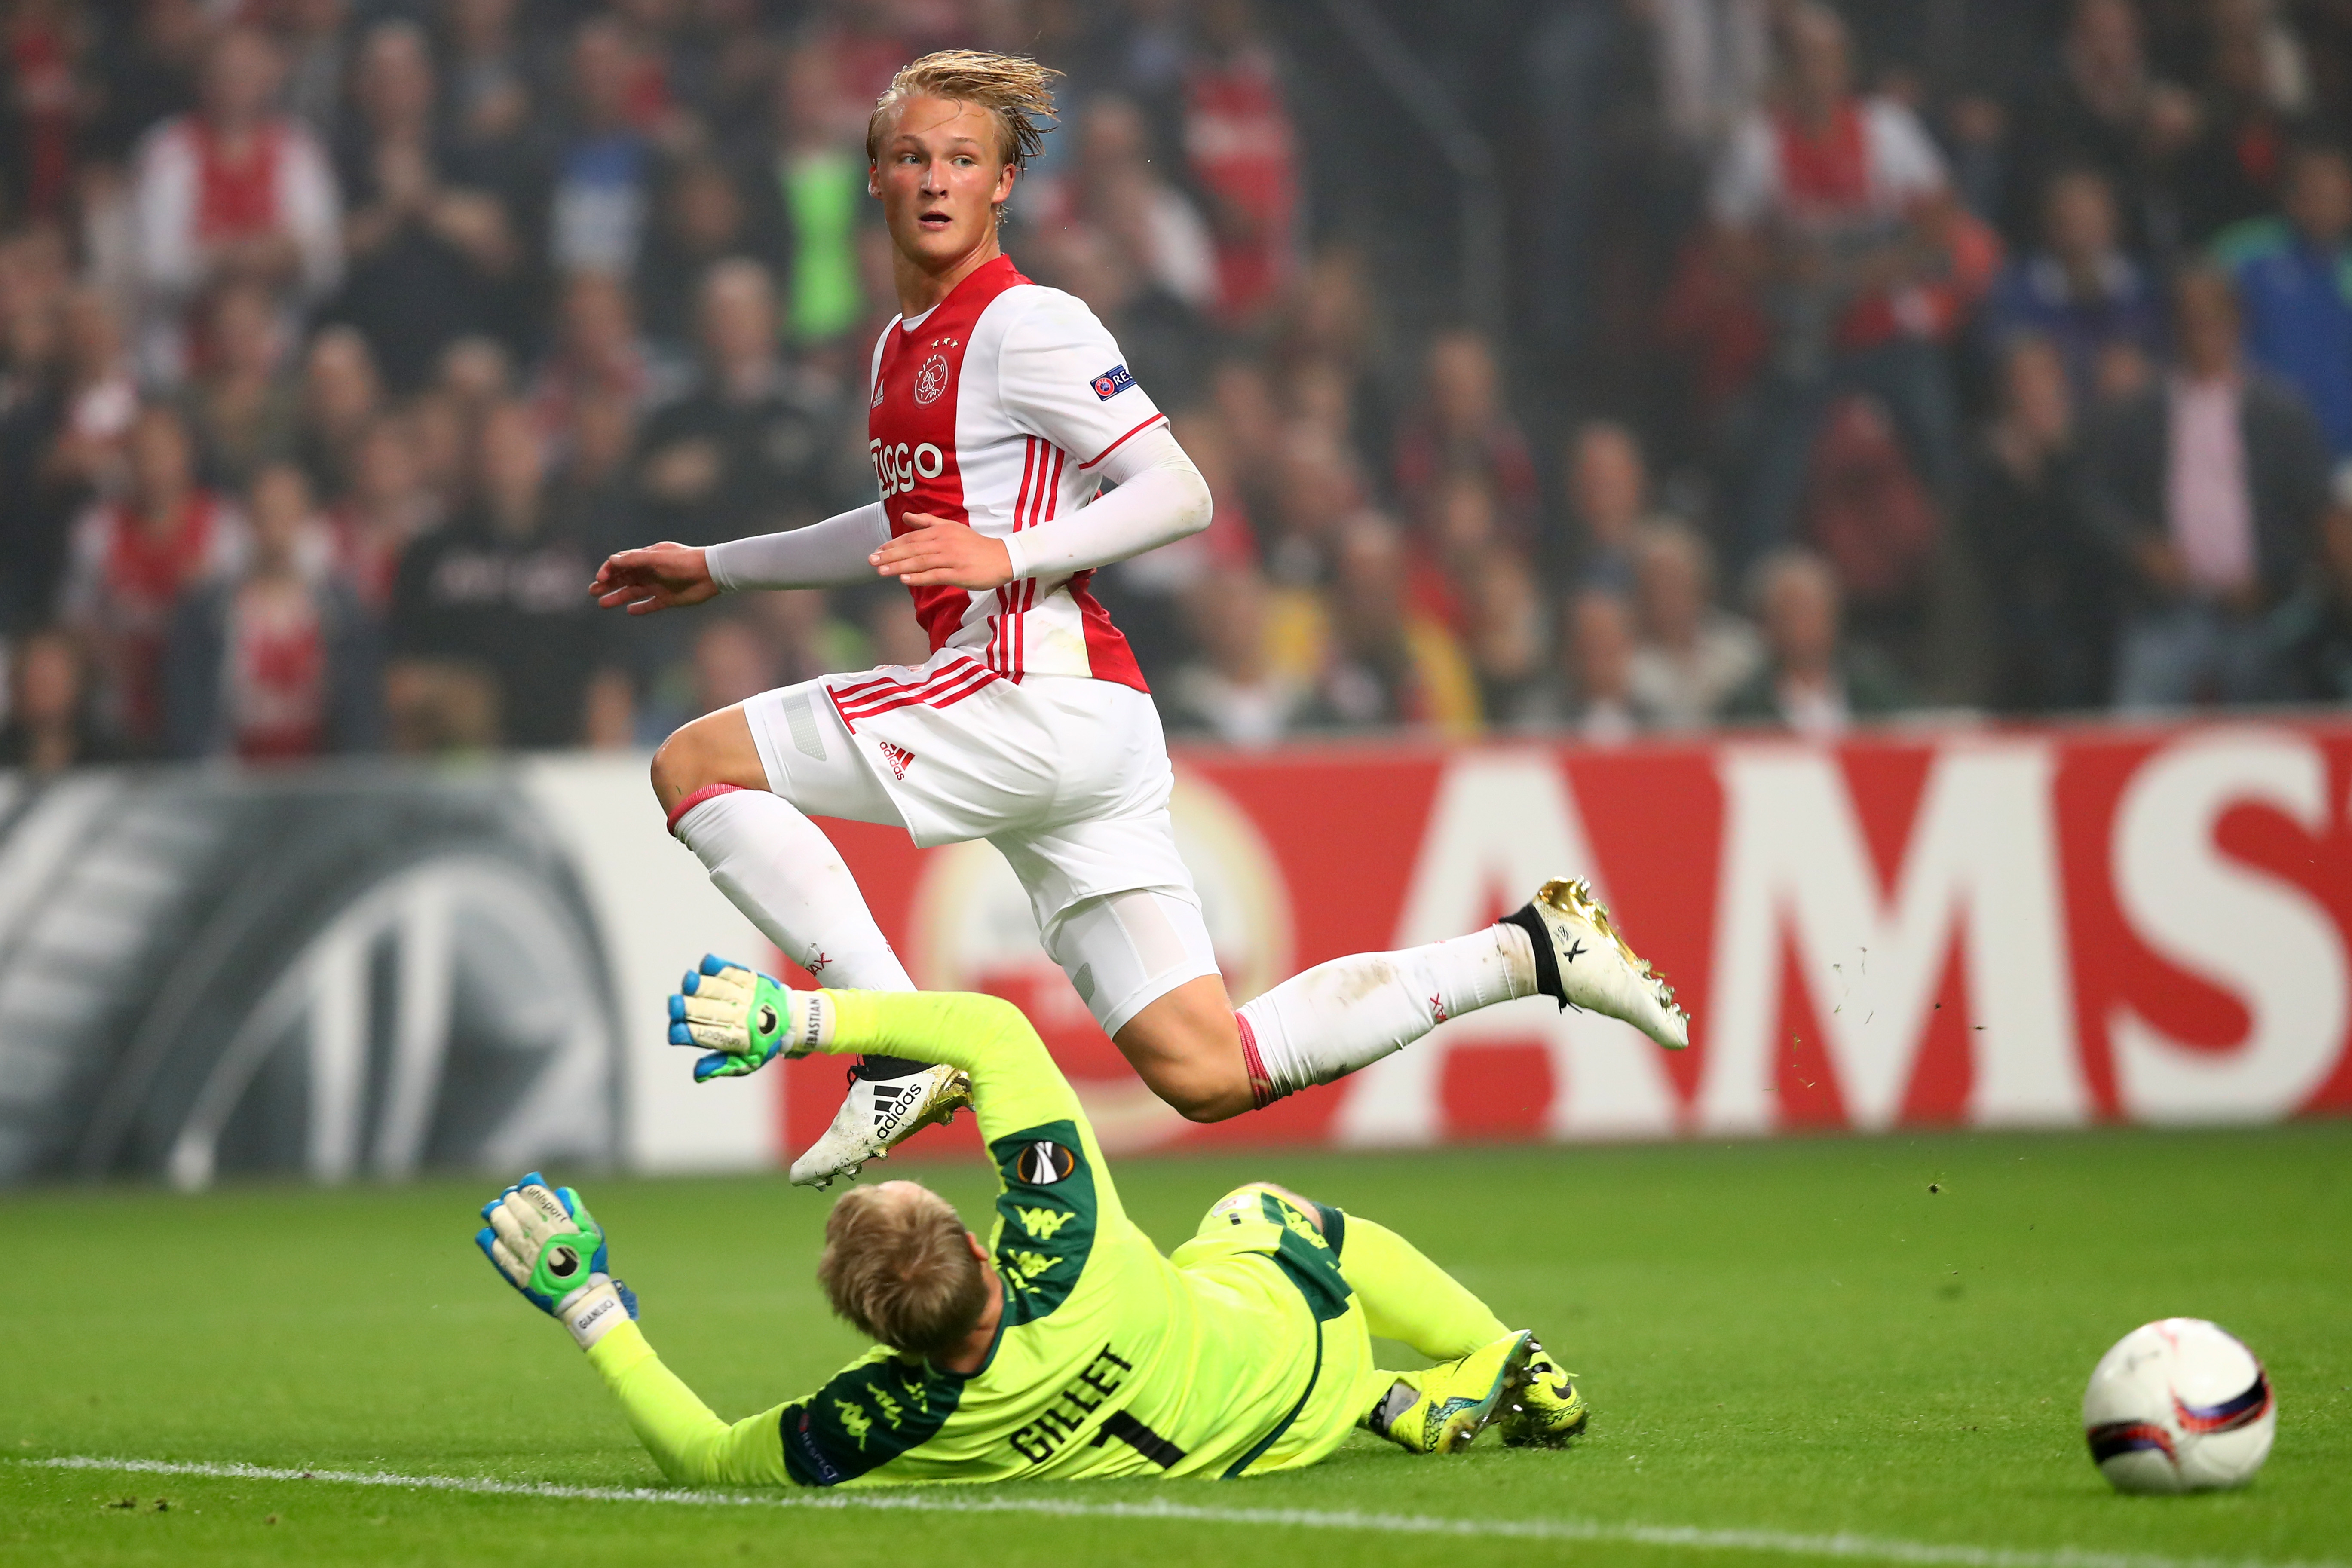 AMSTERDAM, NETHERLANDS - SEPTEMBER 29:  Kasper Dolberg of Ajax is tackled by goalkeeper Jean-François Gillet of Standard Liege during their UEFA Europa League group stage match.  (Photo by Dean Mouhtaropoulos/Getty Images)